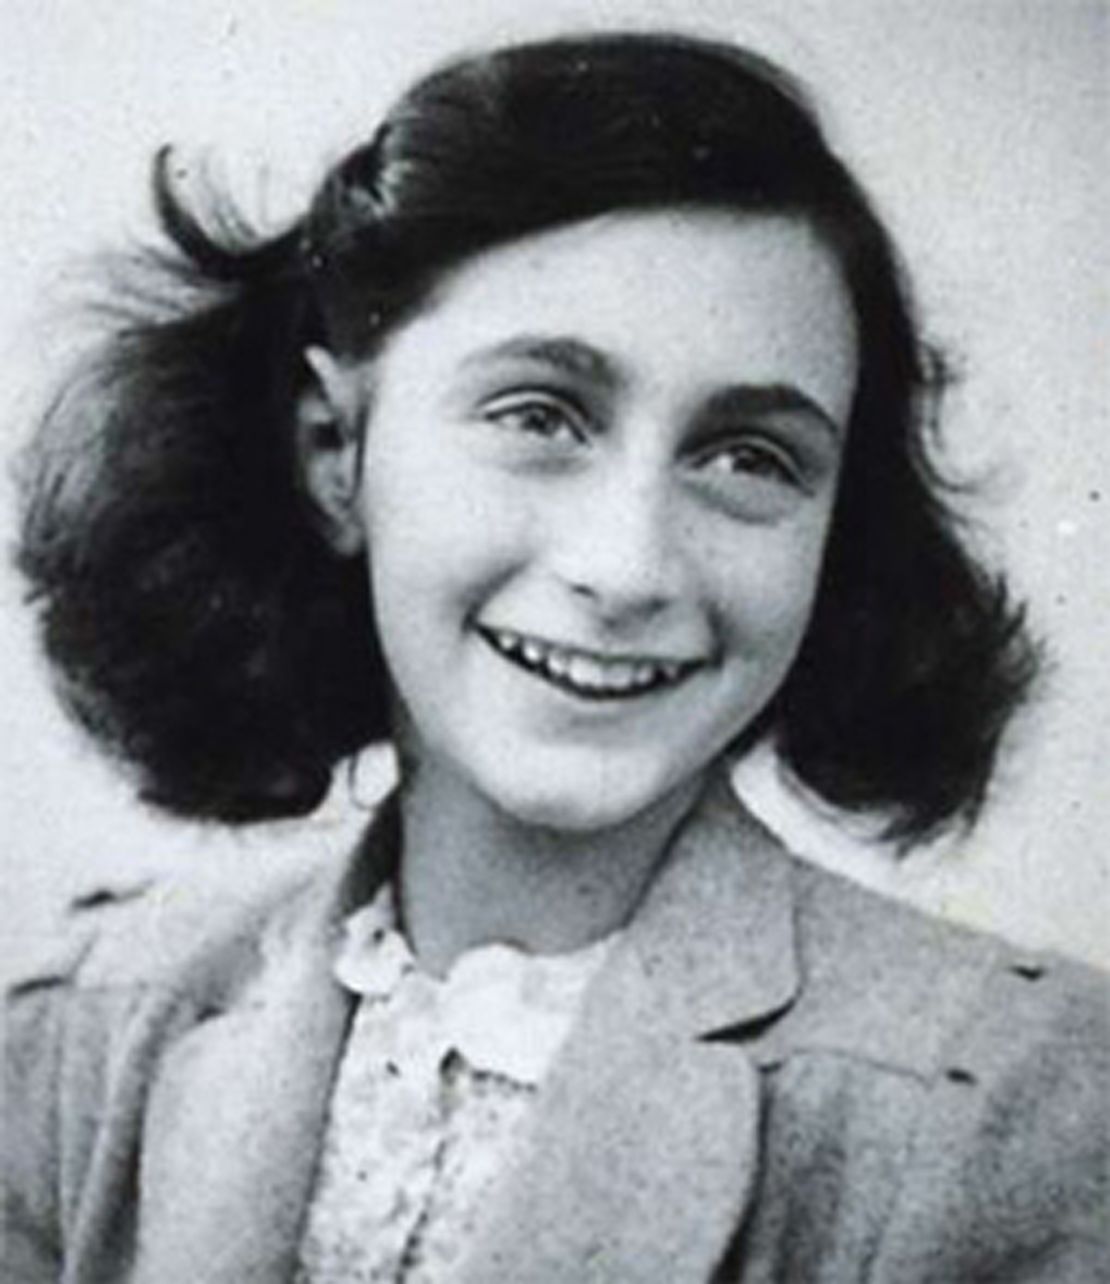 Anne Frank's diary gave an early glimpse into the Holocaust. She was a first cousin of Buddy Elias.